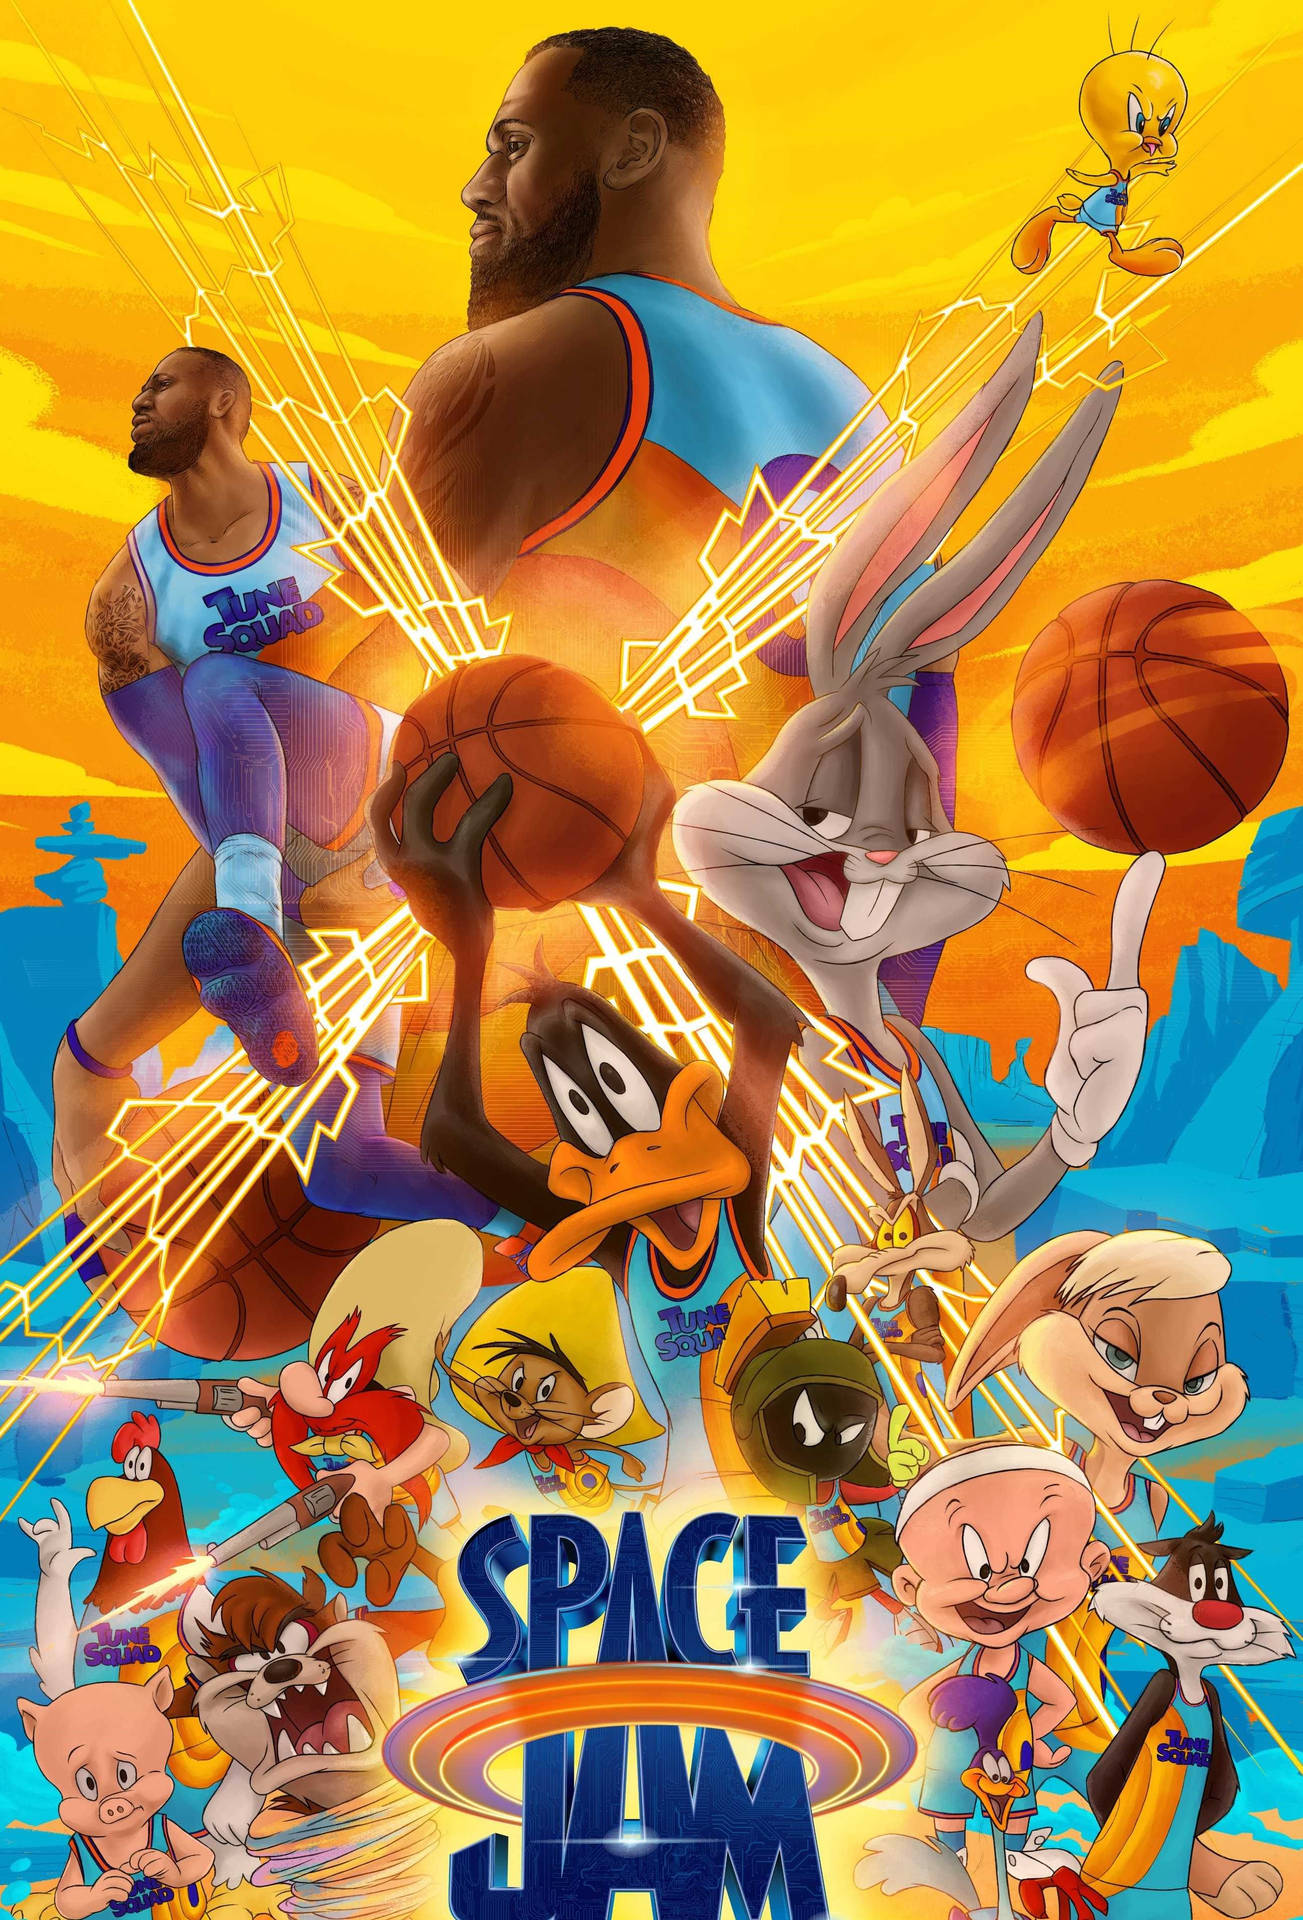 Michael Jordan is back in Space Jam 2, where he faces off against a swarthy team of intergalactic foes Wallpaper